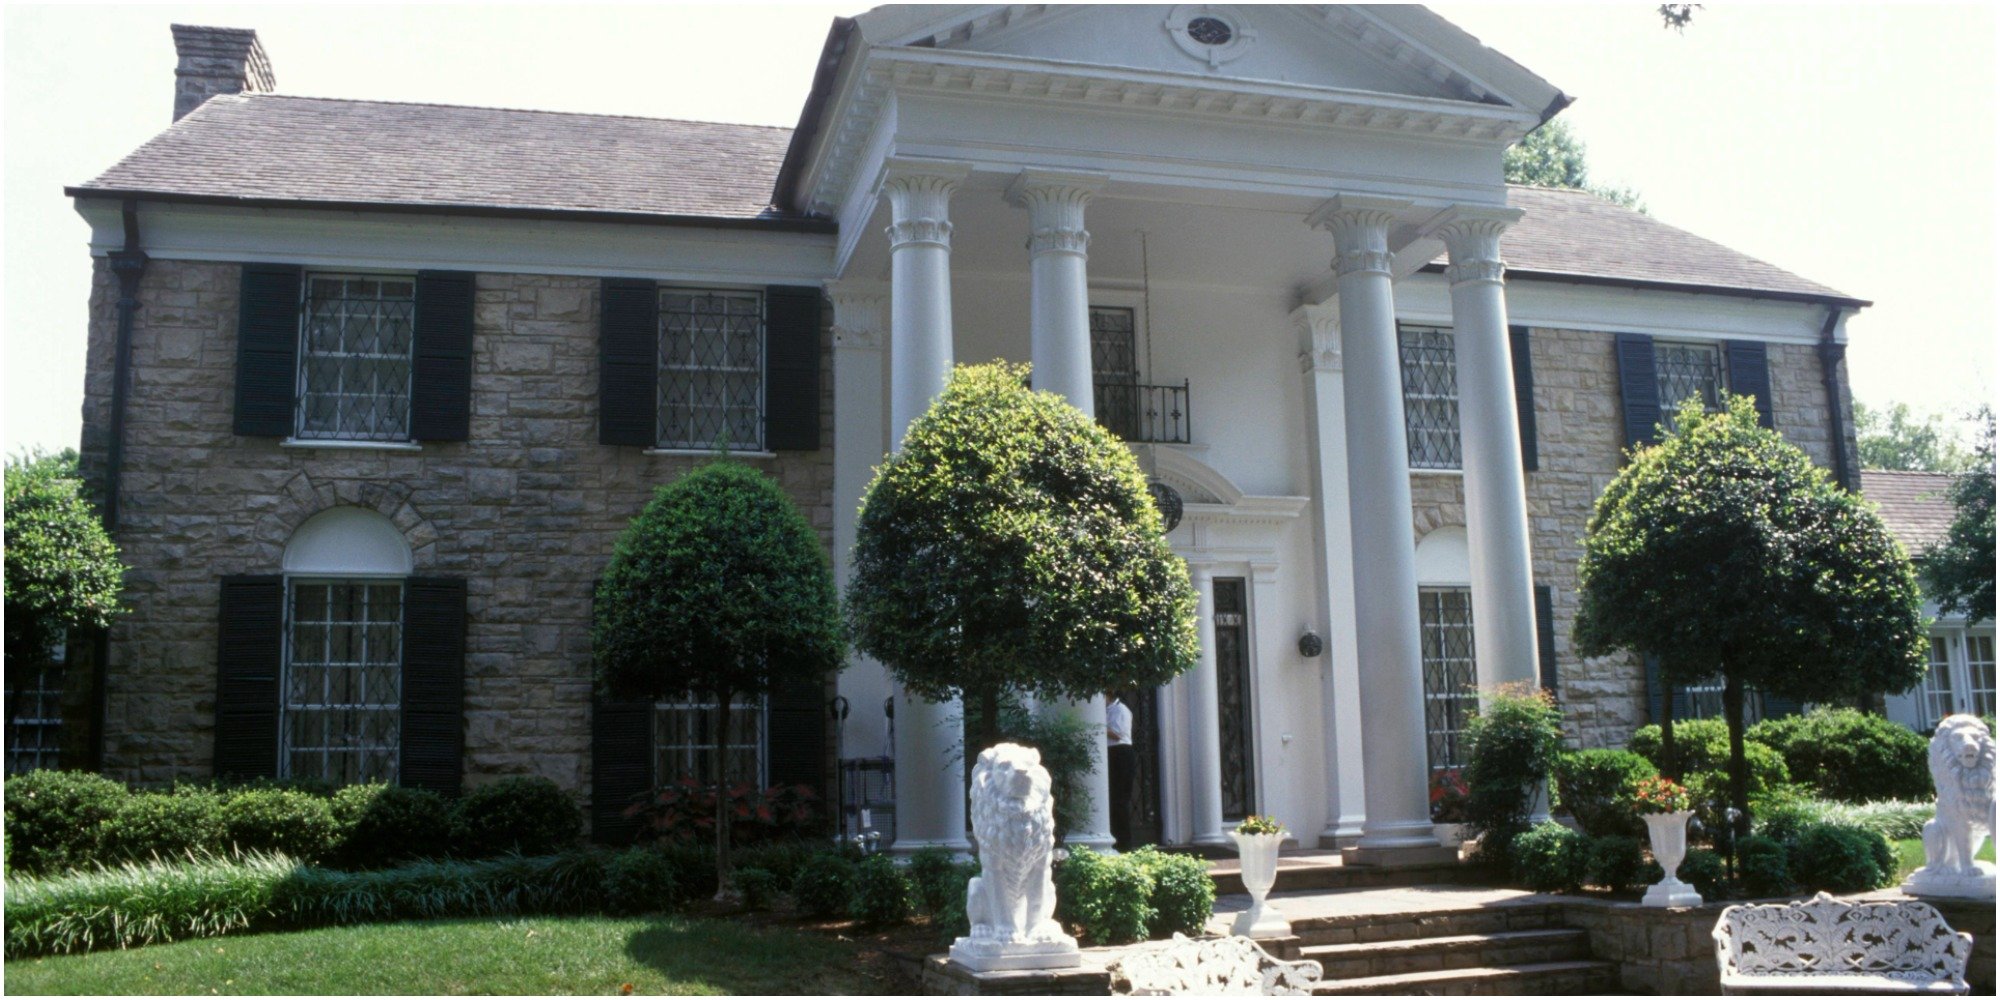 Graceland Mansion photographed in the 1970s.